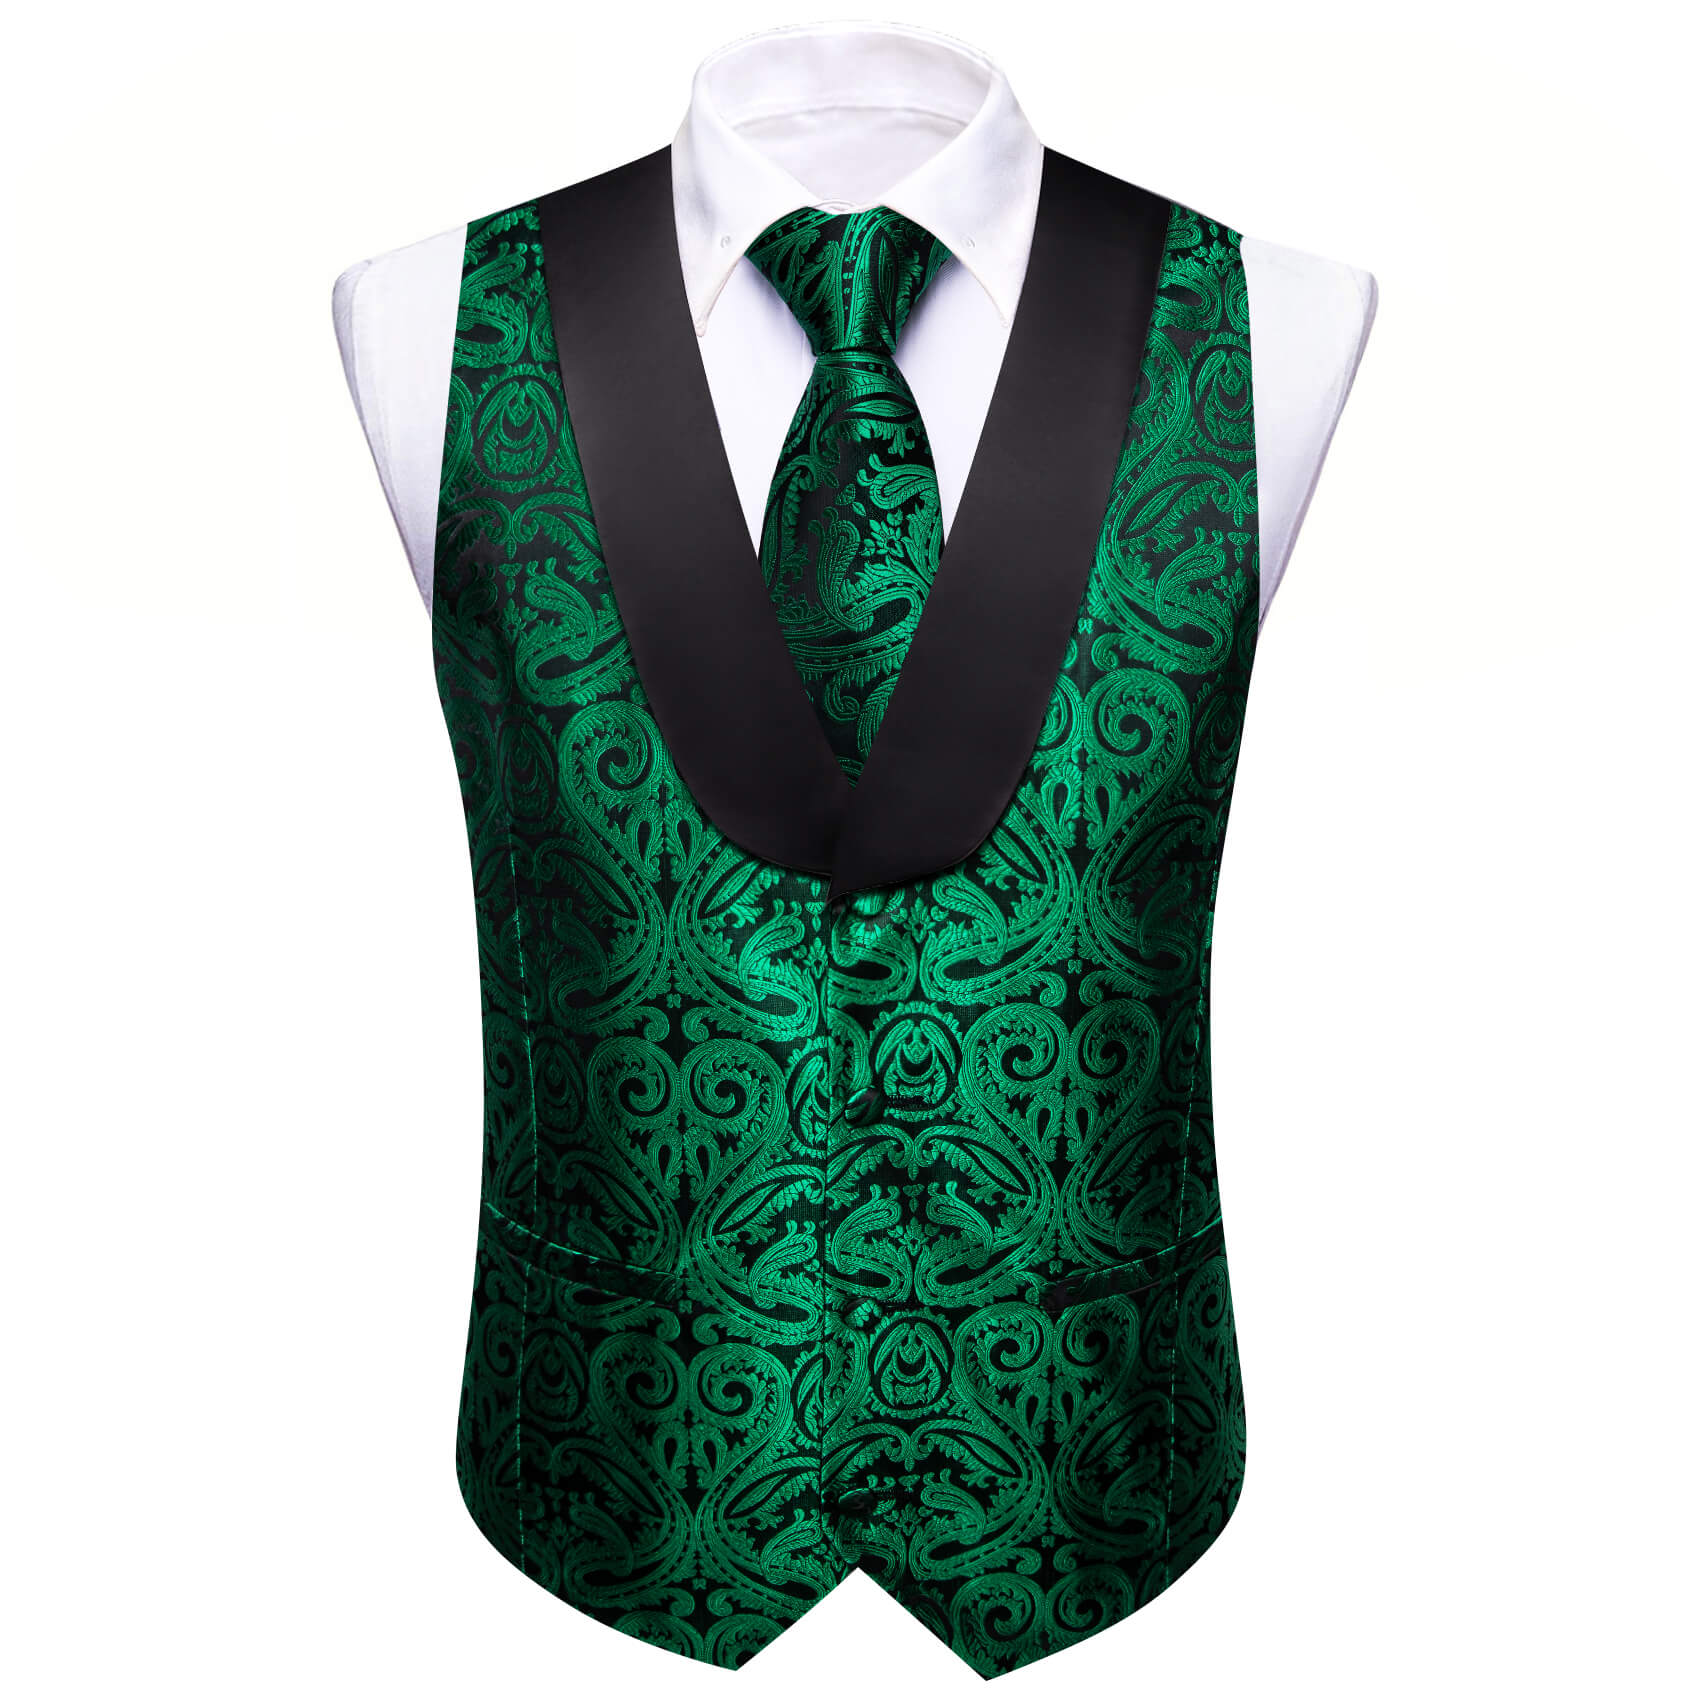 Barry.wang Shawl Collar Vest Forest Green Paisley Vest Tie Set for Men